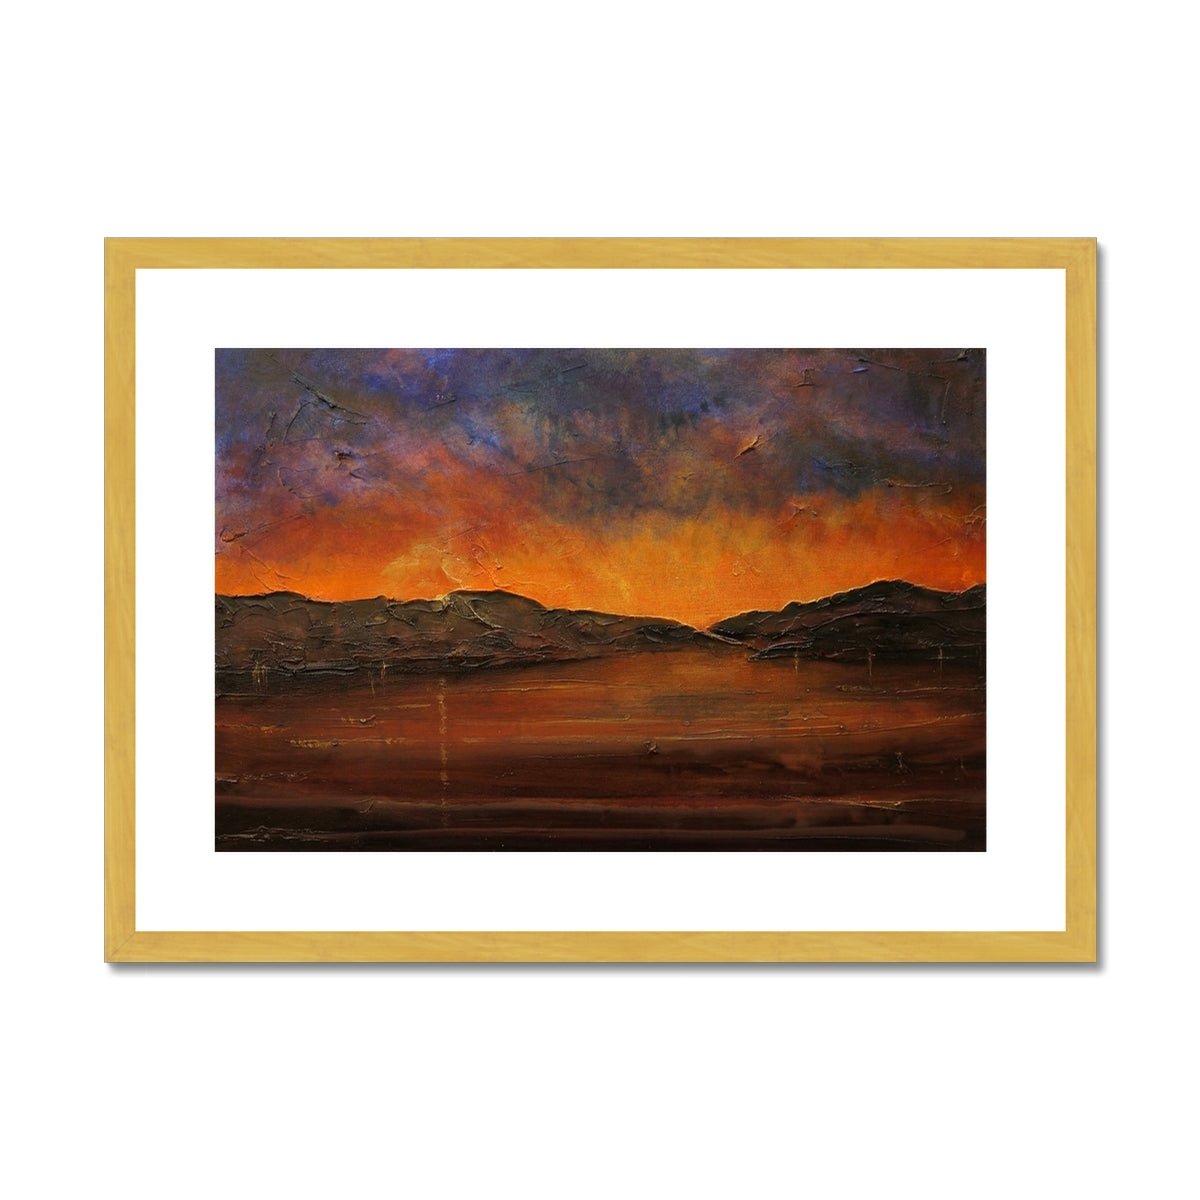 A Brooding River Clyde Dusk Painting | Antique Framed & Mounted Prints From Scotland-Antique Framed & Mounted Prints-River Clyde Art Gallery-A2 Landscape-Gold Frame-Paintings, Prints, Homeware, Art Gifts From Scotland By Scottish Artist Kevin Hunter